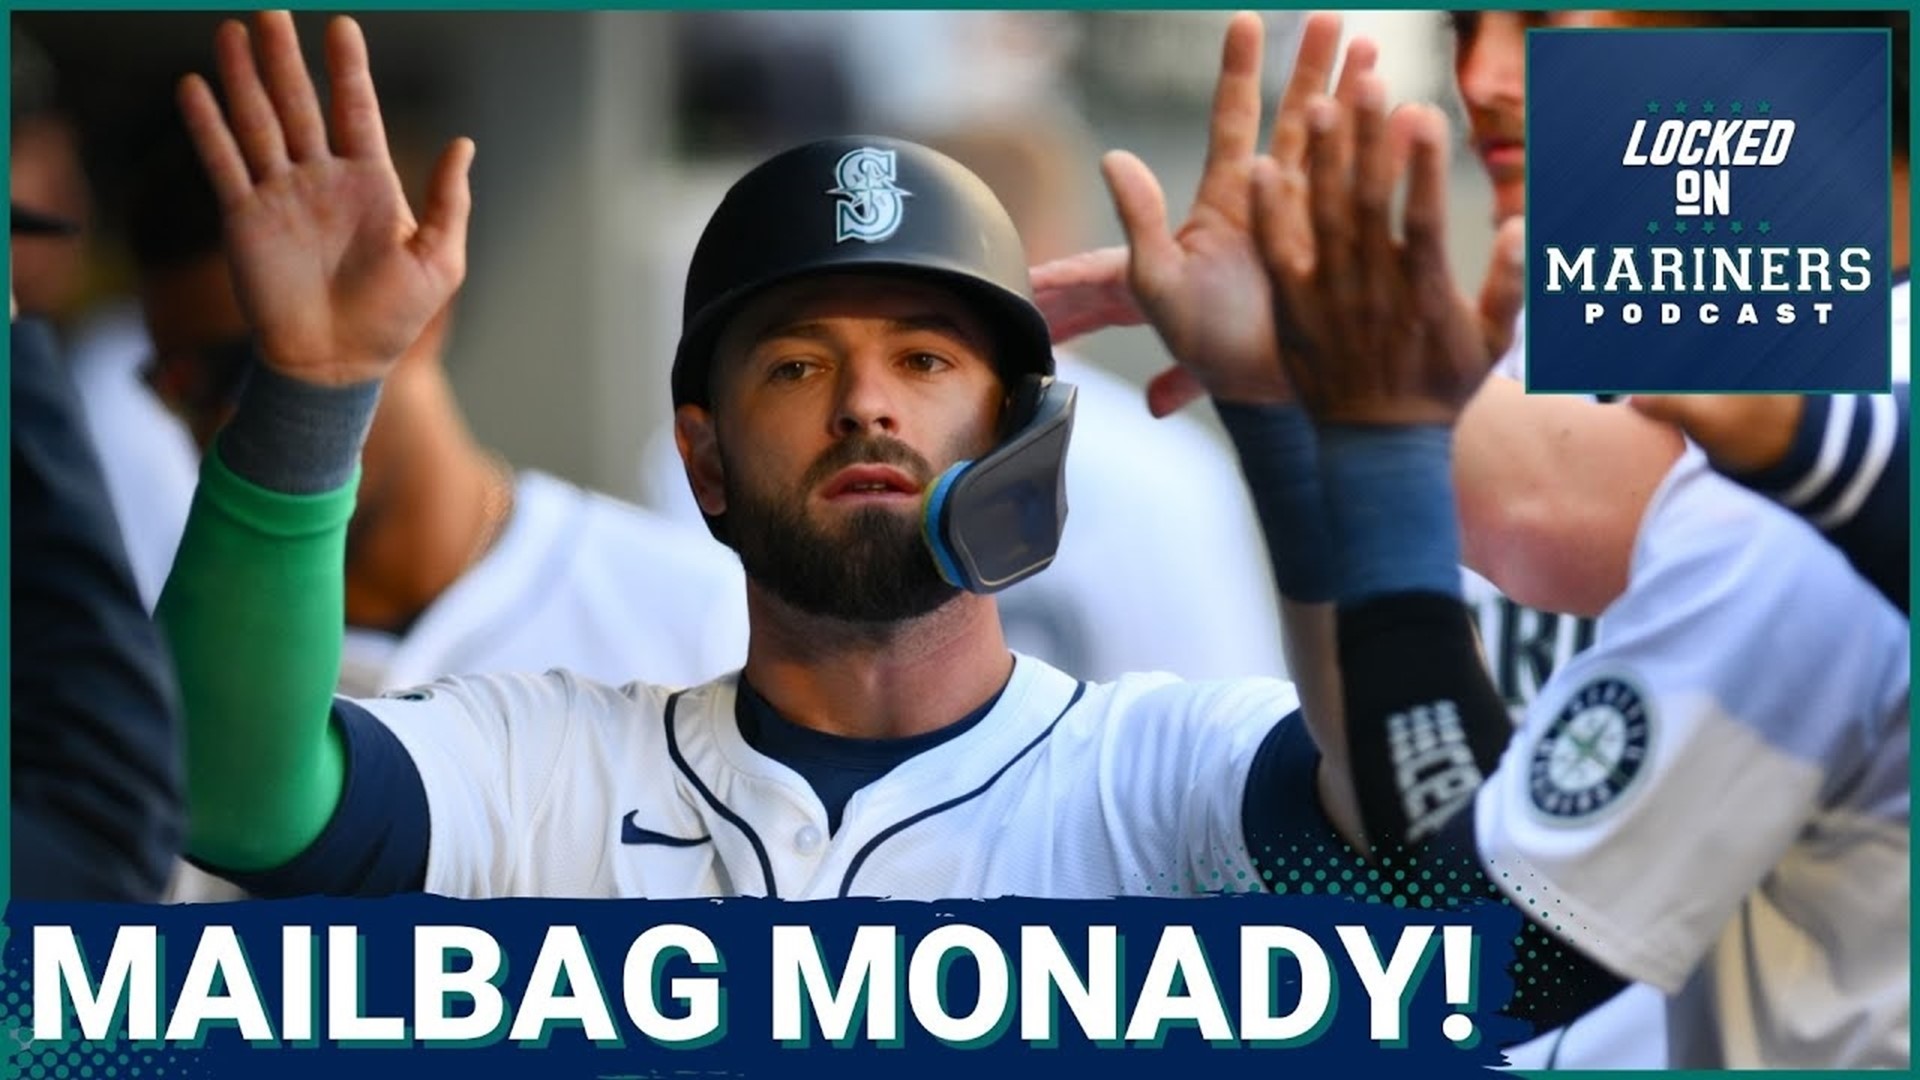 It's the first Mailbag Monday of the regular season! Ty is still getting over his cold, but he and Colby answer a few of your Mariners questions.